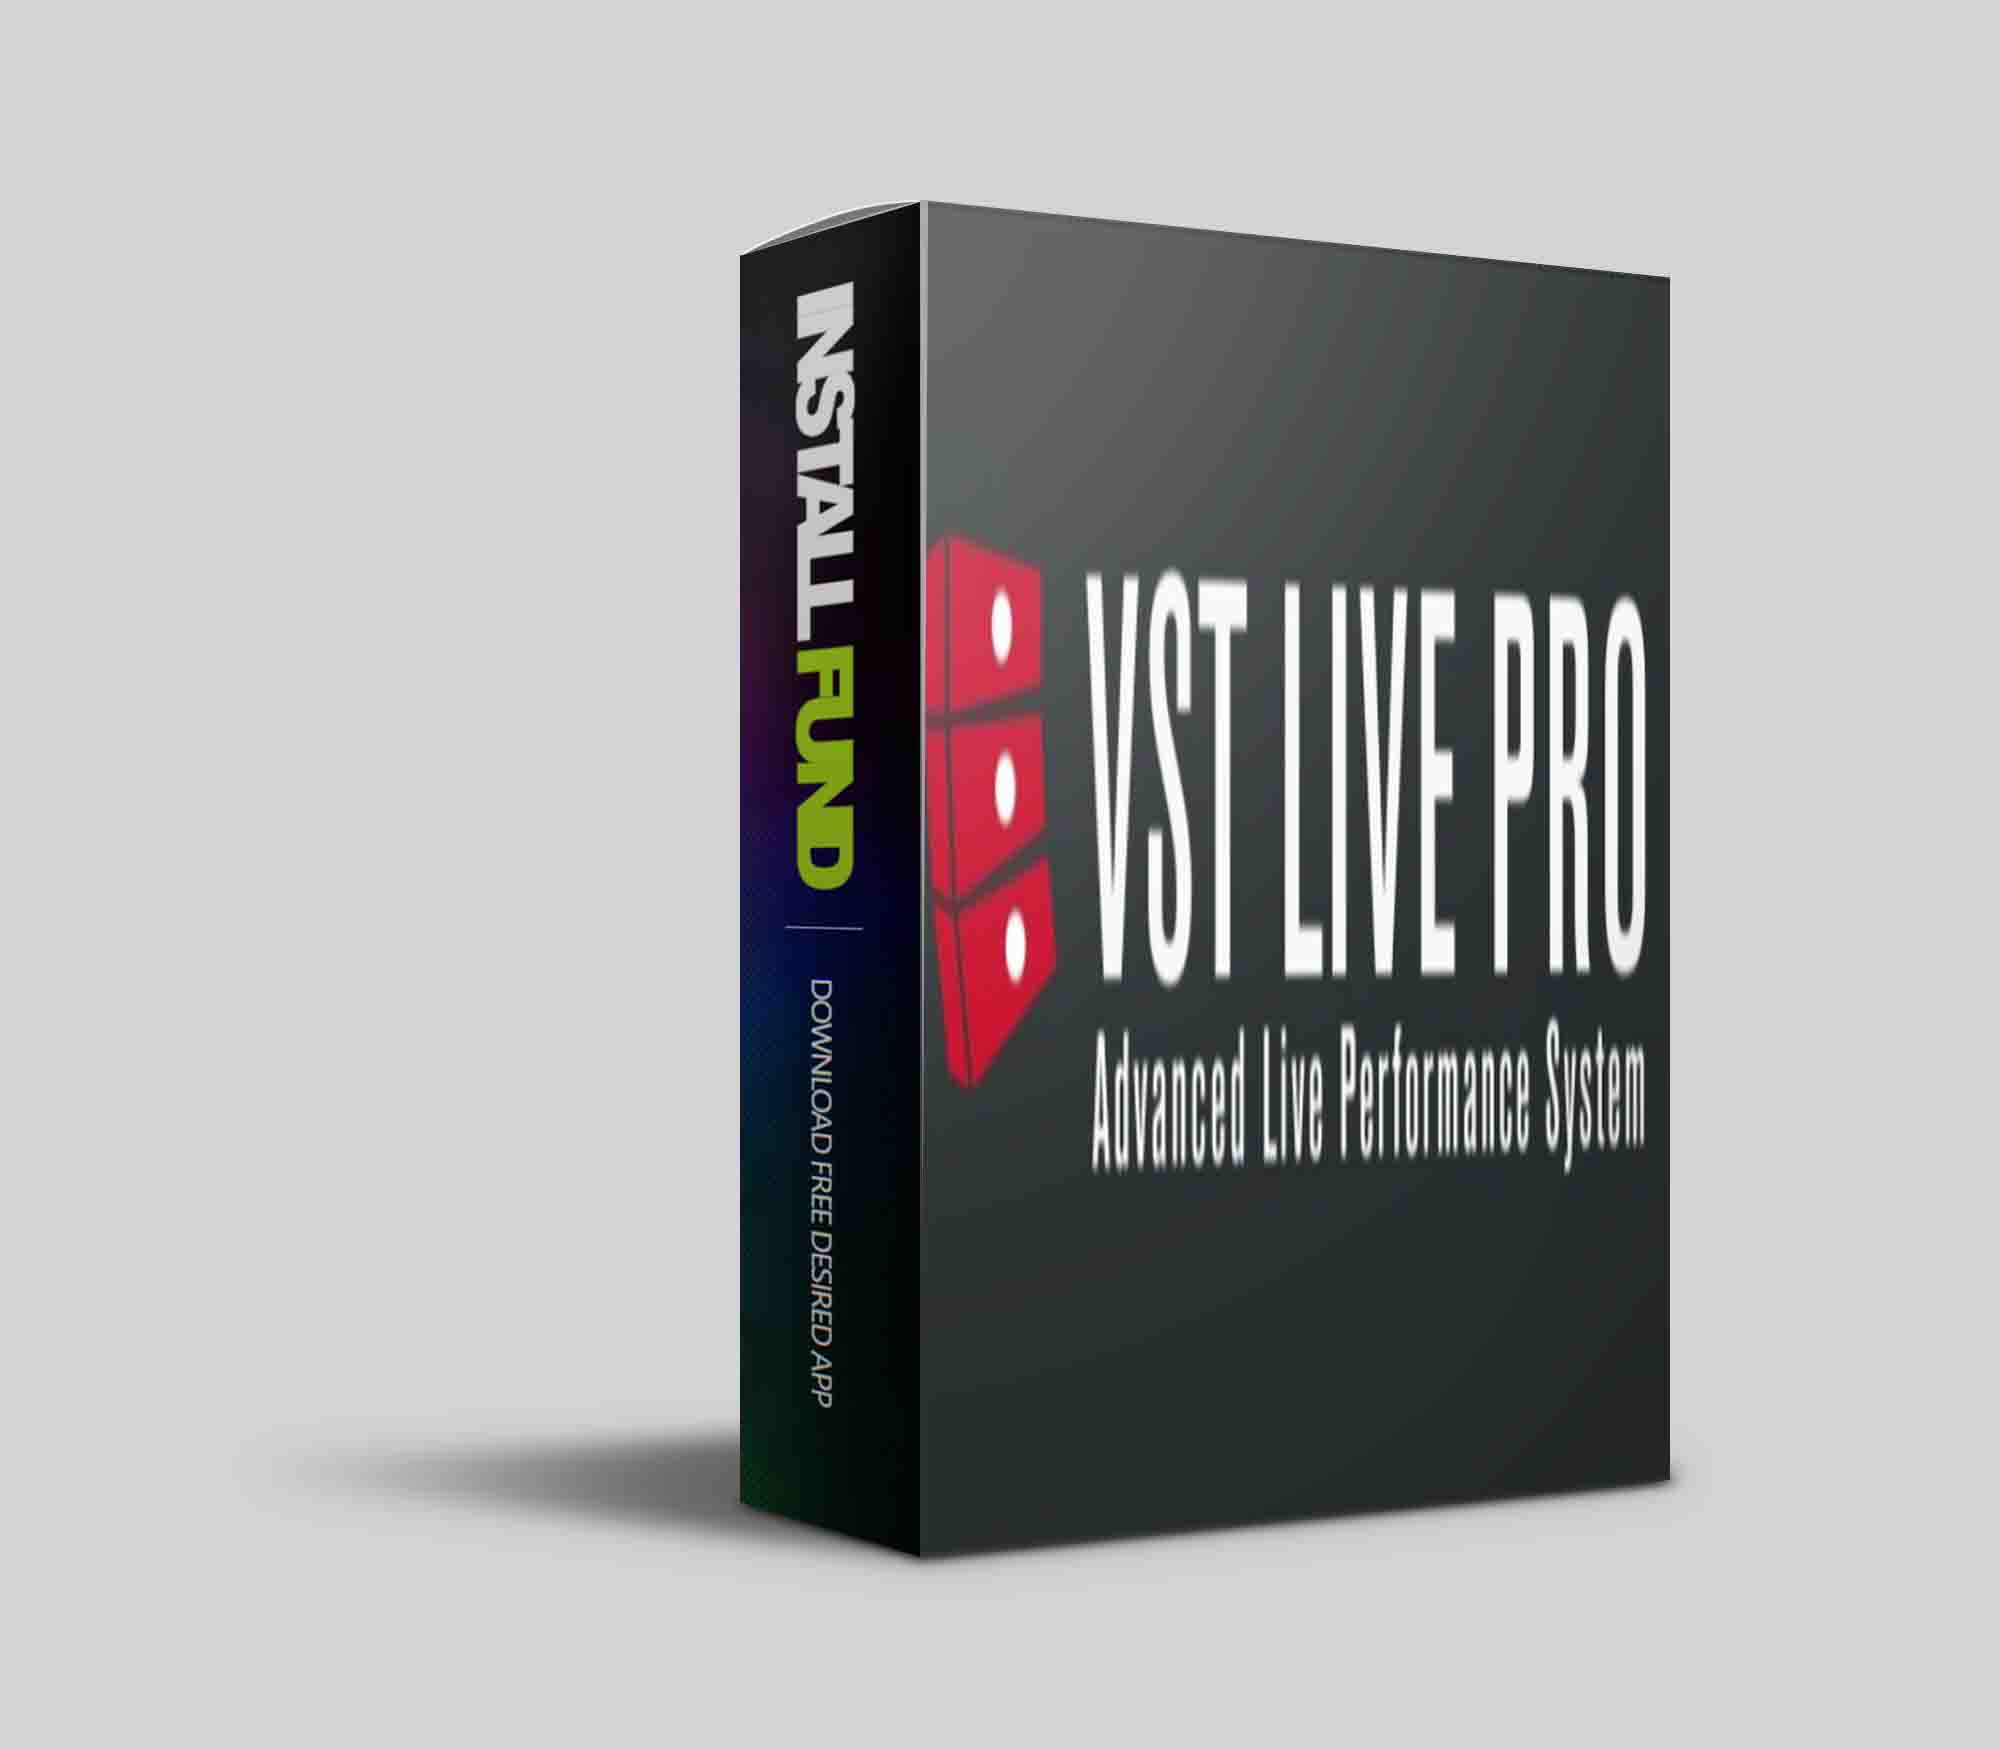 Steinberg VST Live Pro 1.2 download the new